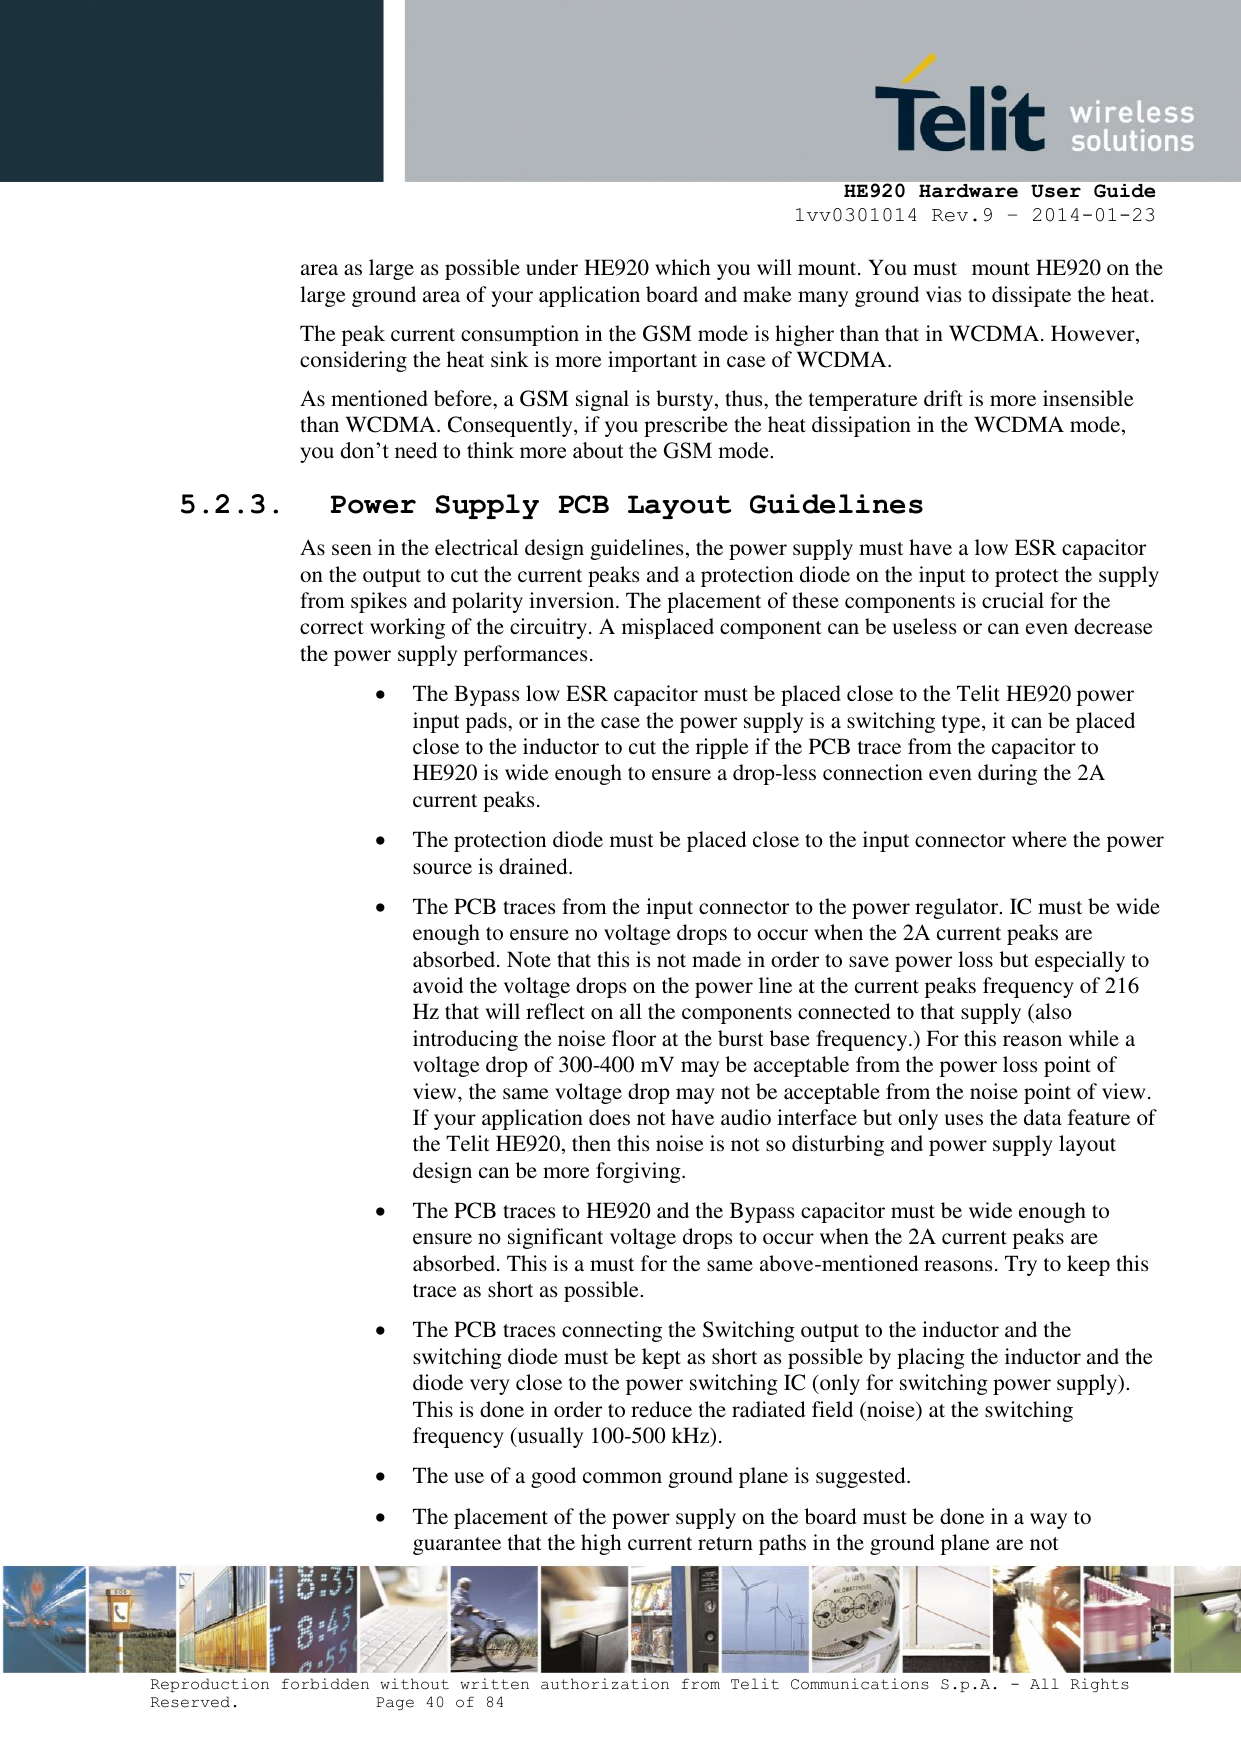     HE920 Hardware User Guide 1vv0301014 Rev.9 – 2014-01-23 Reproduction forbidden without written authorization from Telit Communications S.p.A. - All Rights Reserved.    Page 40 of 84  area as large as possible under HE920 which you will mount. You must mount HE920 on the large ground area of your application board and make many ground vias to dissipate the heat. The peak current consumption in the GSM mode is higher than that in WCDMA. However, considering the heat sink is more important in case of WCDMA. As mentioned before, a GSM signal is bursty, thus, the temperature drift is more insensible than WCDMA. Consequently, if you prescribe the heat dissipation in the WCDMA mode, you don’t need to think more about the GSM mode. 5.2.3. Power Supply PCB Layout Guidelines As seen in the electrical design guidelines, the power supply must have a low ESR capacitor on the output to cut the current peaks and a protection diode on the input to protect the supply from spikes and polarity inversion. The placement of these components is crucial for the correct working of the circuitry. A misplaced component can be useless or can even decrease the power supply performances.  The Bypass low ESR capacitor must be placed close to the Telit HE920 power input pads, or in the case the power supply is a switching type, it can be placed close to the inductor to cut the ripple if the PCB trace from the capacitor to HE920 is wide enough to ensure a drop-less connection even during the 2A current peaks.  The protection diode must be placed close to the input connector where the power source is drained.  The PCB traces from the input connector to the power regulator. IC must be wide enough to ensure no voltage drops to occur when the 2A current peaks are absorbed. Note that this is not made in order to save power loss but especially to avoid the voltage drops on the power line at the current peaks frequency of 216 Hz that will reflect on all the components connected to that supply (also introducing the noise floor at the burst base frequency.) For this reason while a voltage drop of 300-400 mV may be acceptable from the power loss point of view, the same voltage drop may not be acceptable from the noise point of view. If your application does not have audio interface but only uses the data feature of the Telit HE920, then this noise is not so disturbing and power supply layout design can be more forgiving.  The PCB traces to HE920 and the Bypass capacitor must be wide enough to ensure no significant voltage drops to occur when the 2A current peaks are absorbed. This is a must for the same above-mentioned reasons. Try to keep this trace as short as possible.  The PCB traces connecting the Switching output to the inductor and the switching diode must be kept as short as possible by placing the inductor and the diode very close to the power switching IC (only for switching power supply). This is done in order to reduce the radiated field (noise) at the switching frequency (usually 100-500 kHz).  The use of a good common ground plane is suggested.  The placement of the power supply on the board must be done in a way to guarantee that the high current return paths in the ground plane are not 